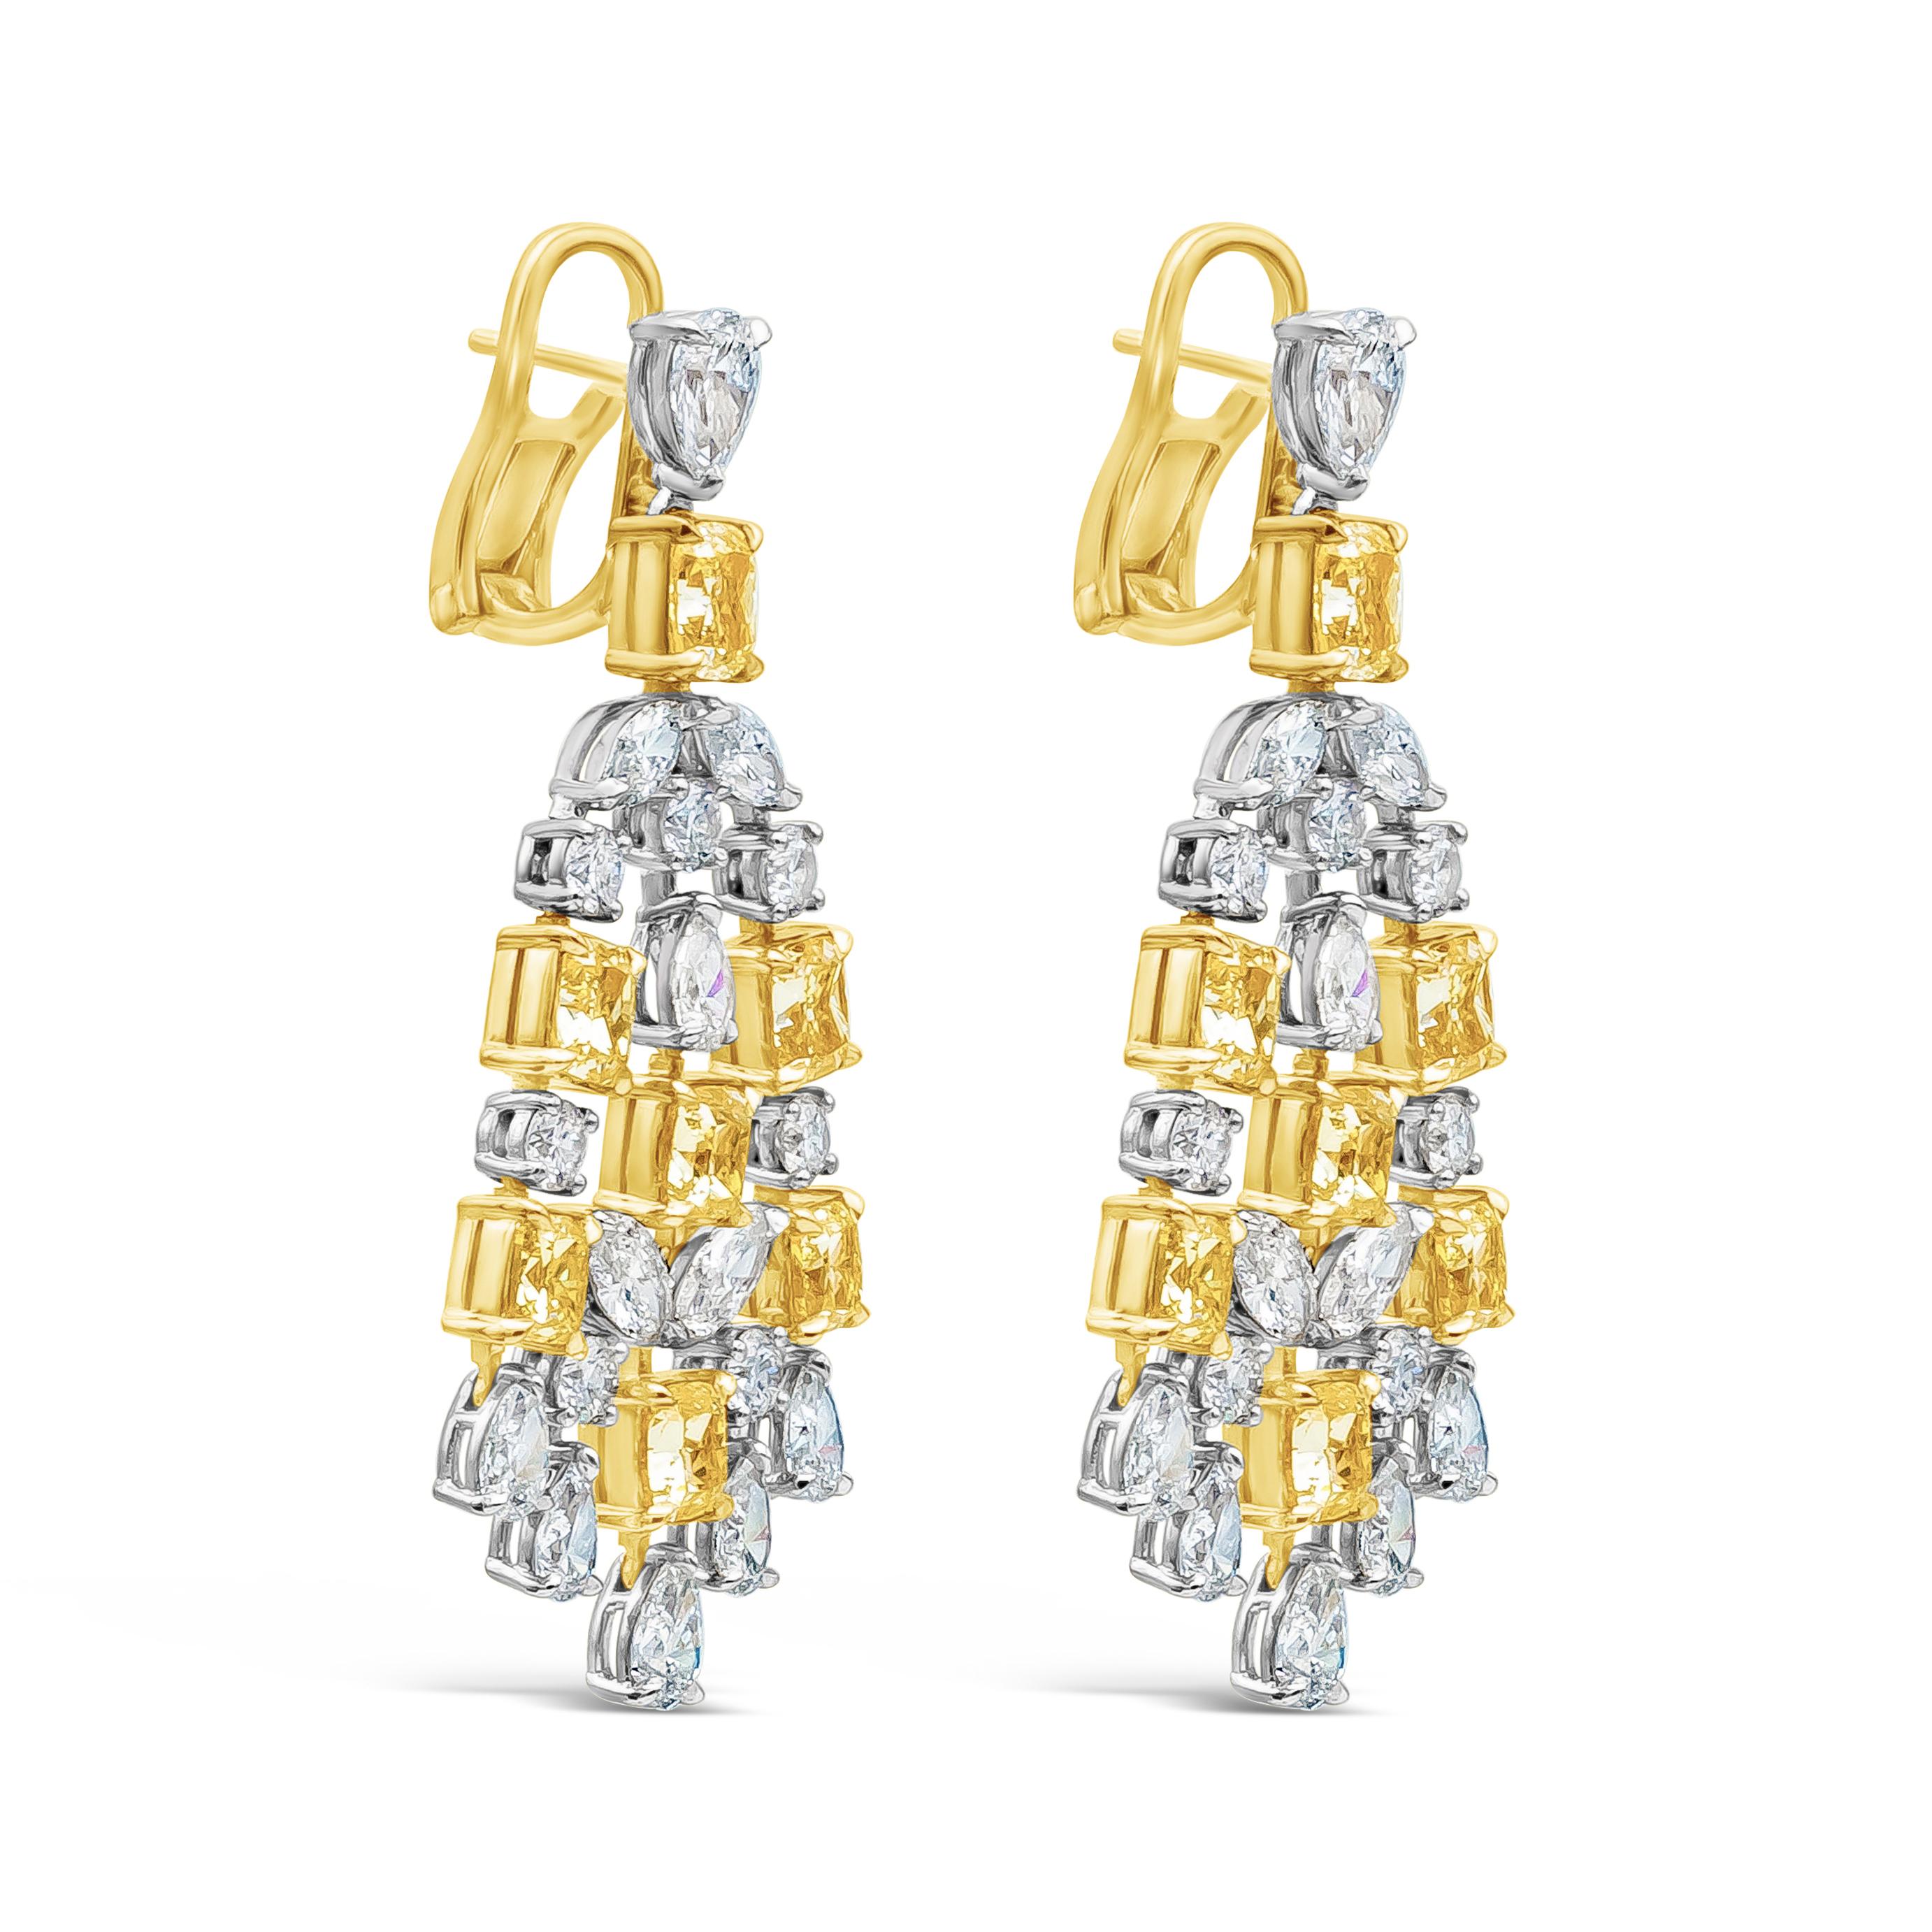 A brilliant piece of high end chandelier earrings, showcasing 14 cushion cut fancy yellow diamonds weighing 9.29 carats total with VS clarity, set on four prong 18K yellow gold. Accented by 36 pieces of mixed cut diamonds weighing 7.27 carats total